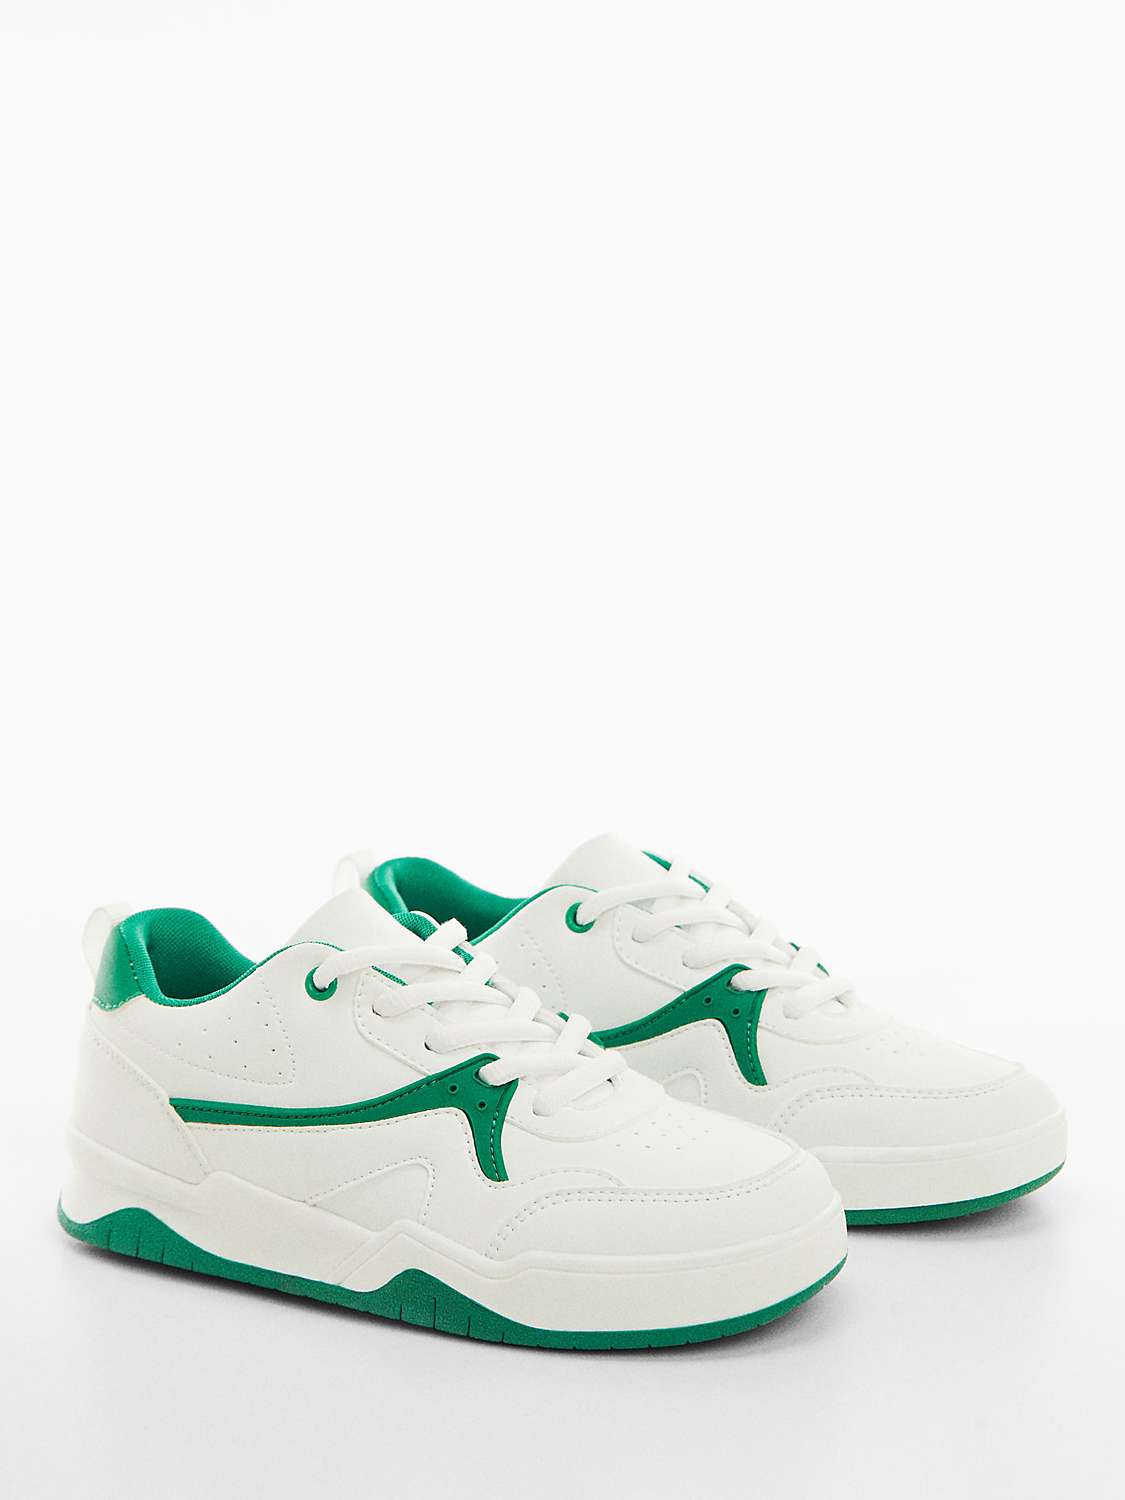 Buy Mango Kids' Goofy Lace Up Trainers, White/Green Online at johnlewis.com